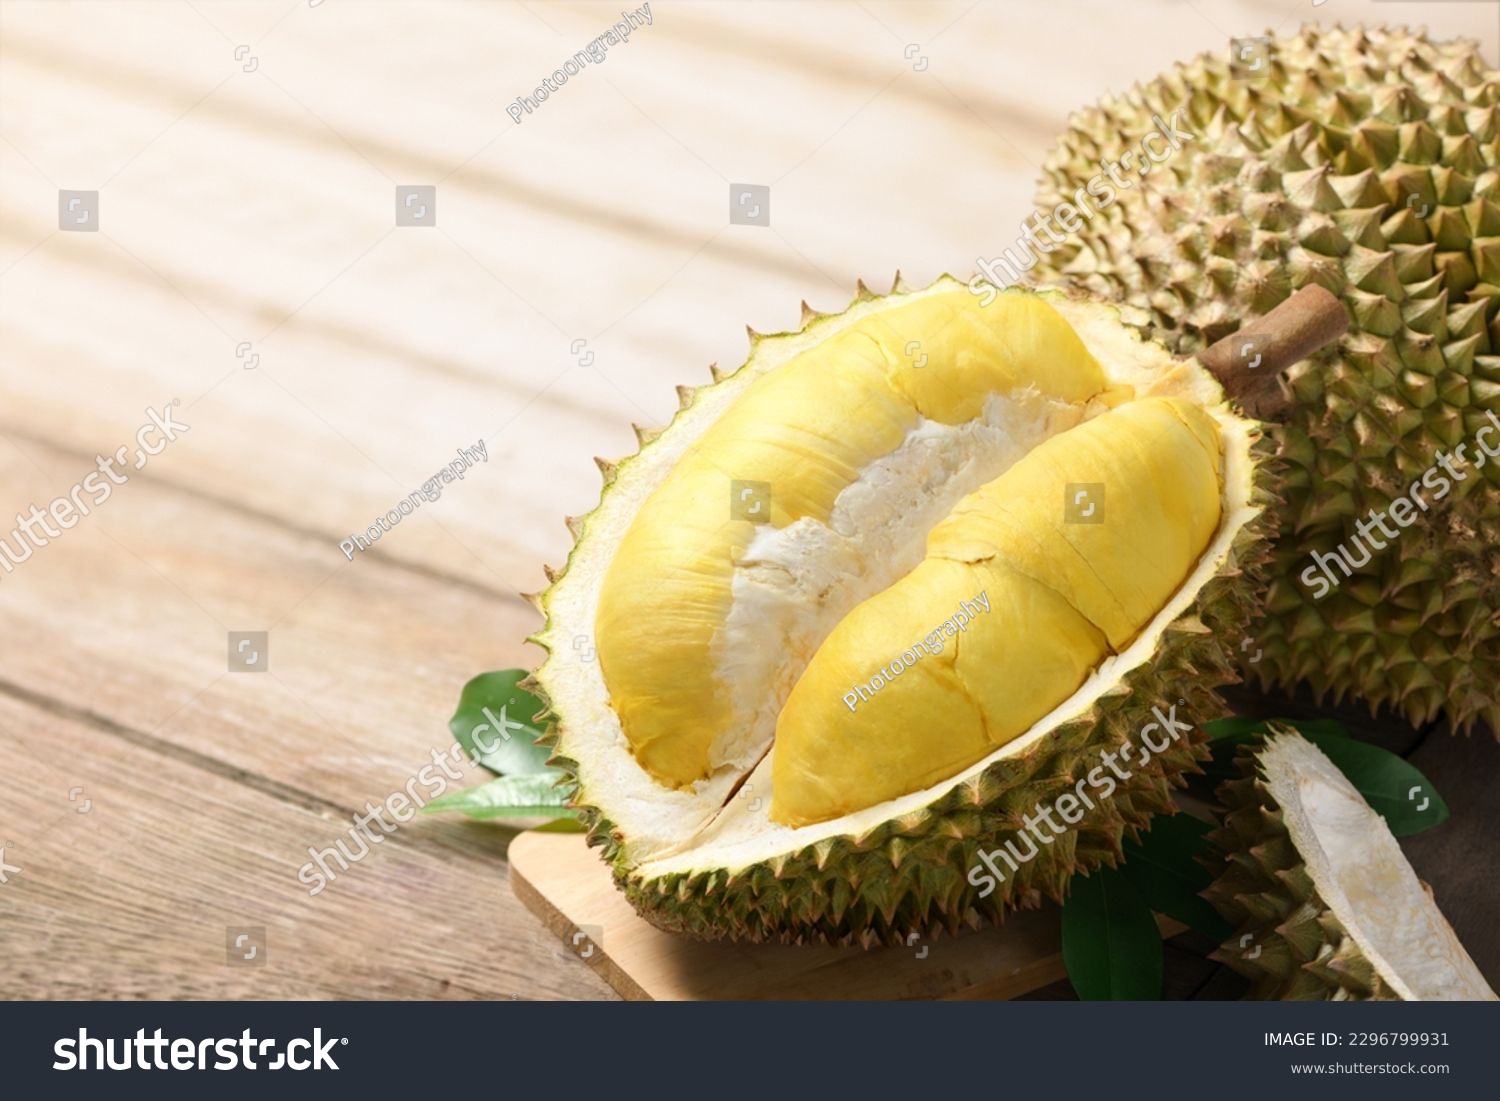 Durian fruit with cut in half on wooden table. #2296799931